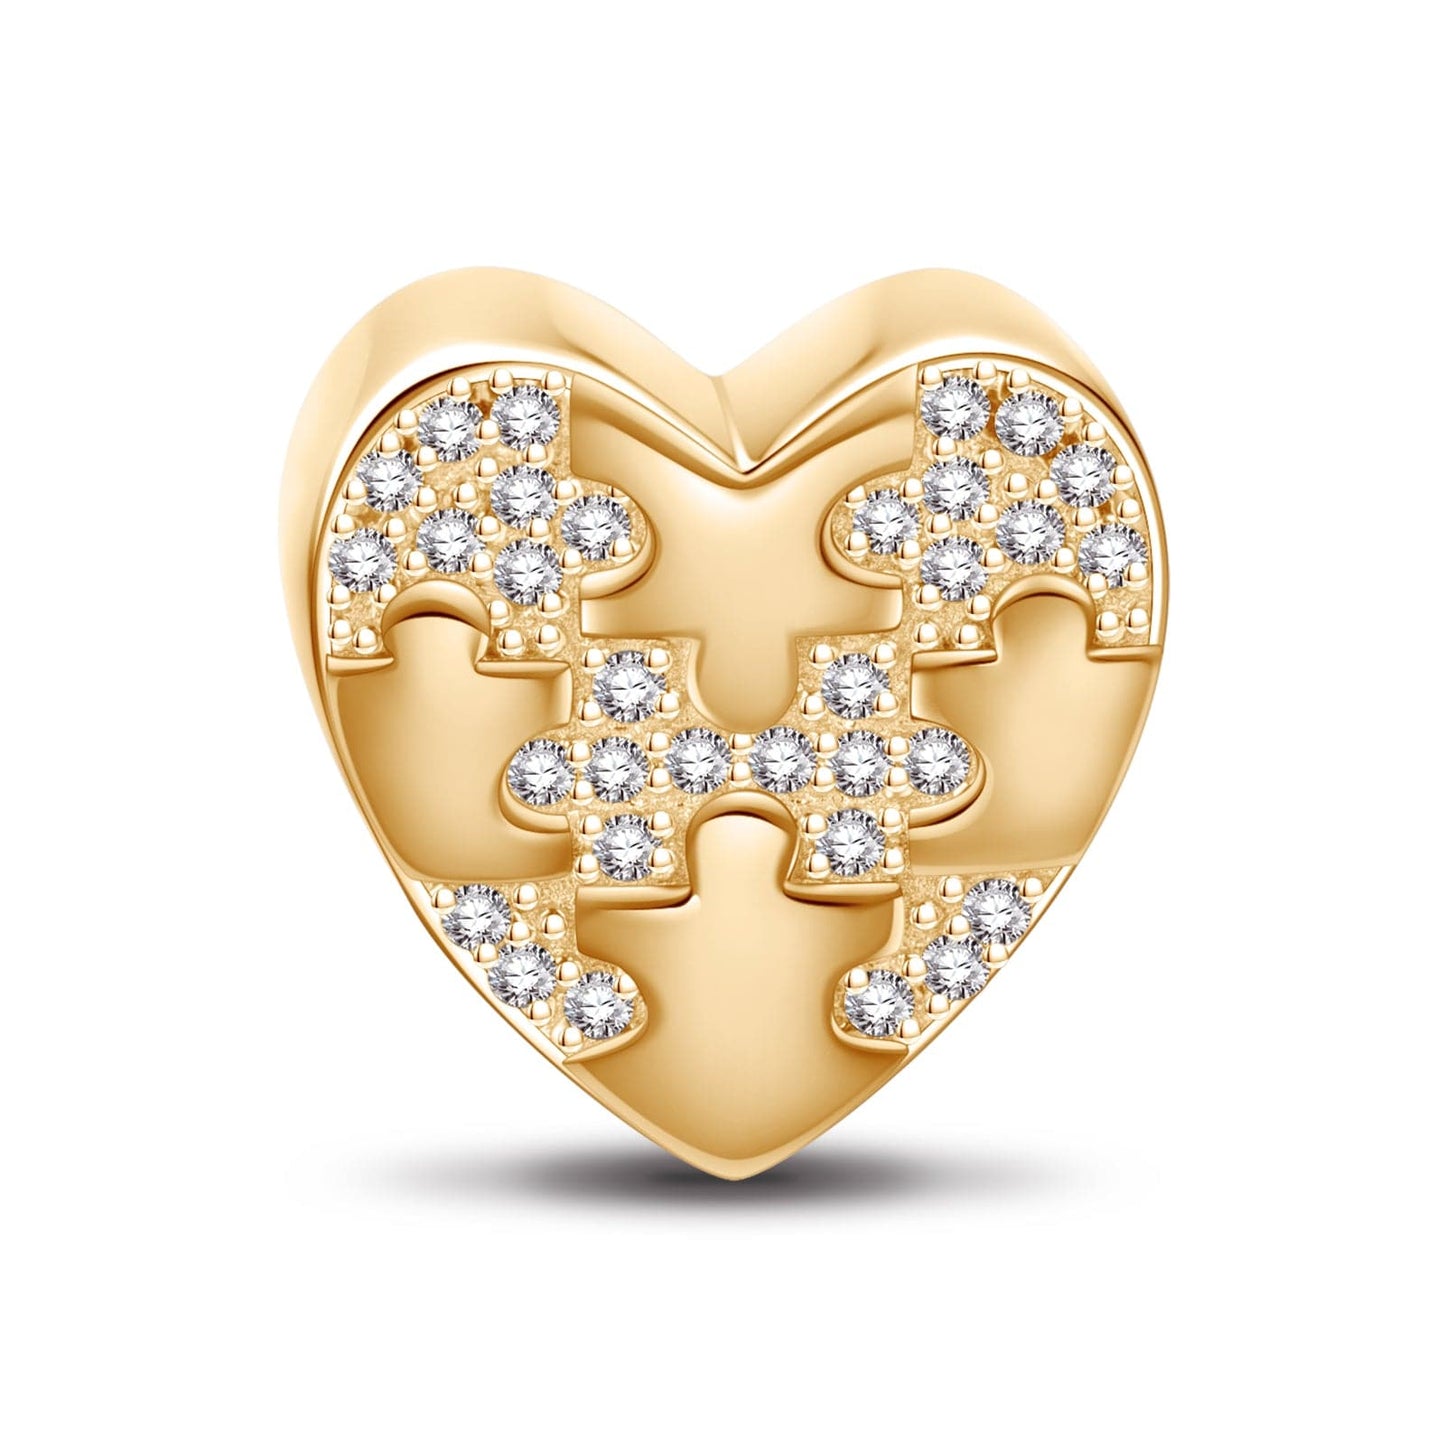 Soulmates Tarnish-resistant Silver Charms In 14K Gold Plated